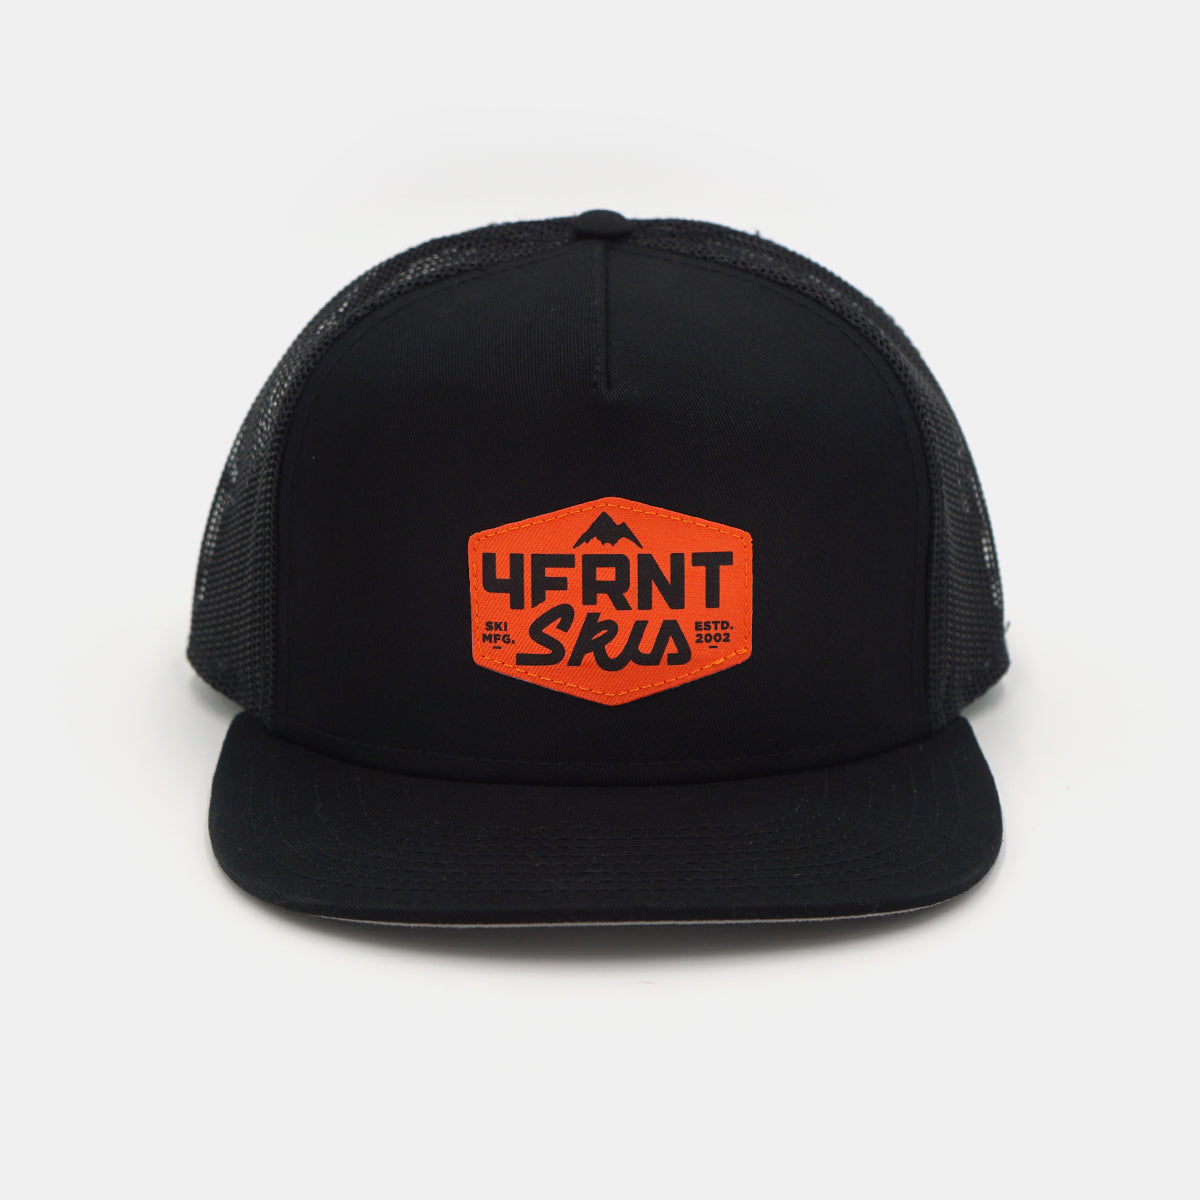 the 4frnt skis black MFG with an orange badge trucker hat front view